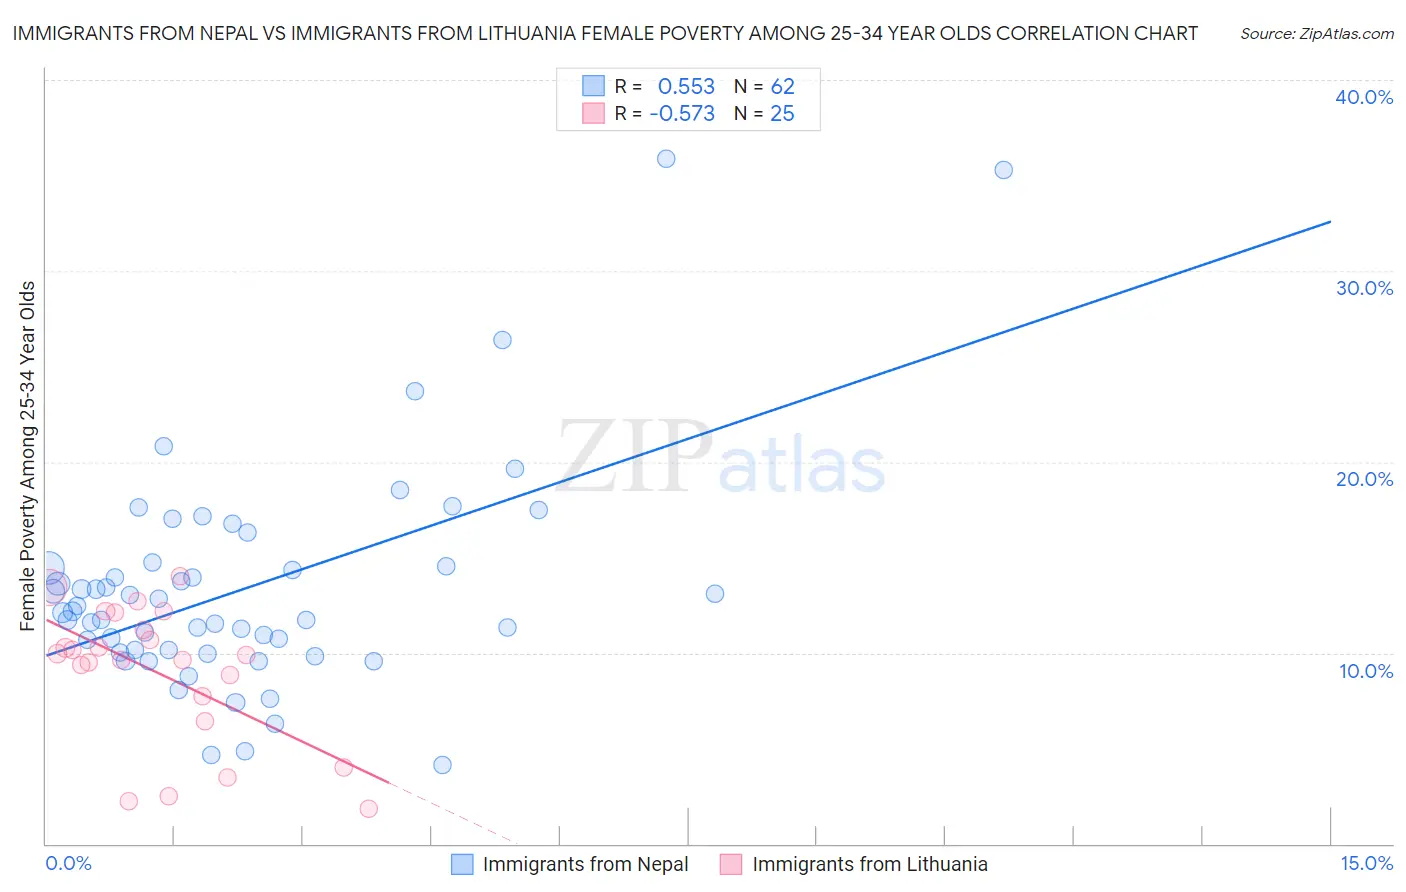 Immigrants from Nepal vs Immigrants from Lithuania Female Poverty Among 25-34 Year Olds